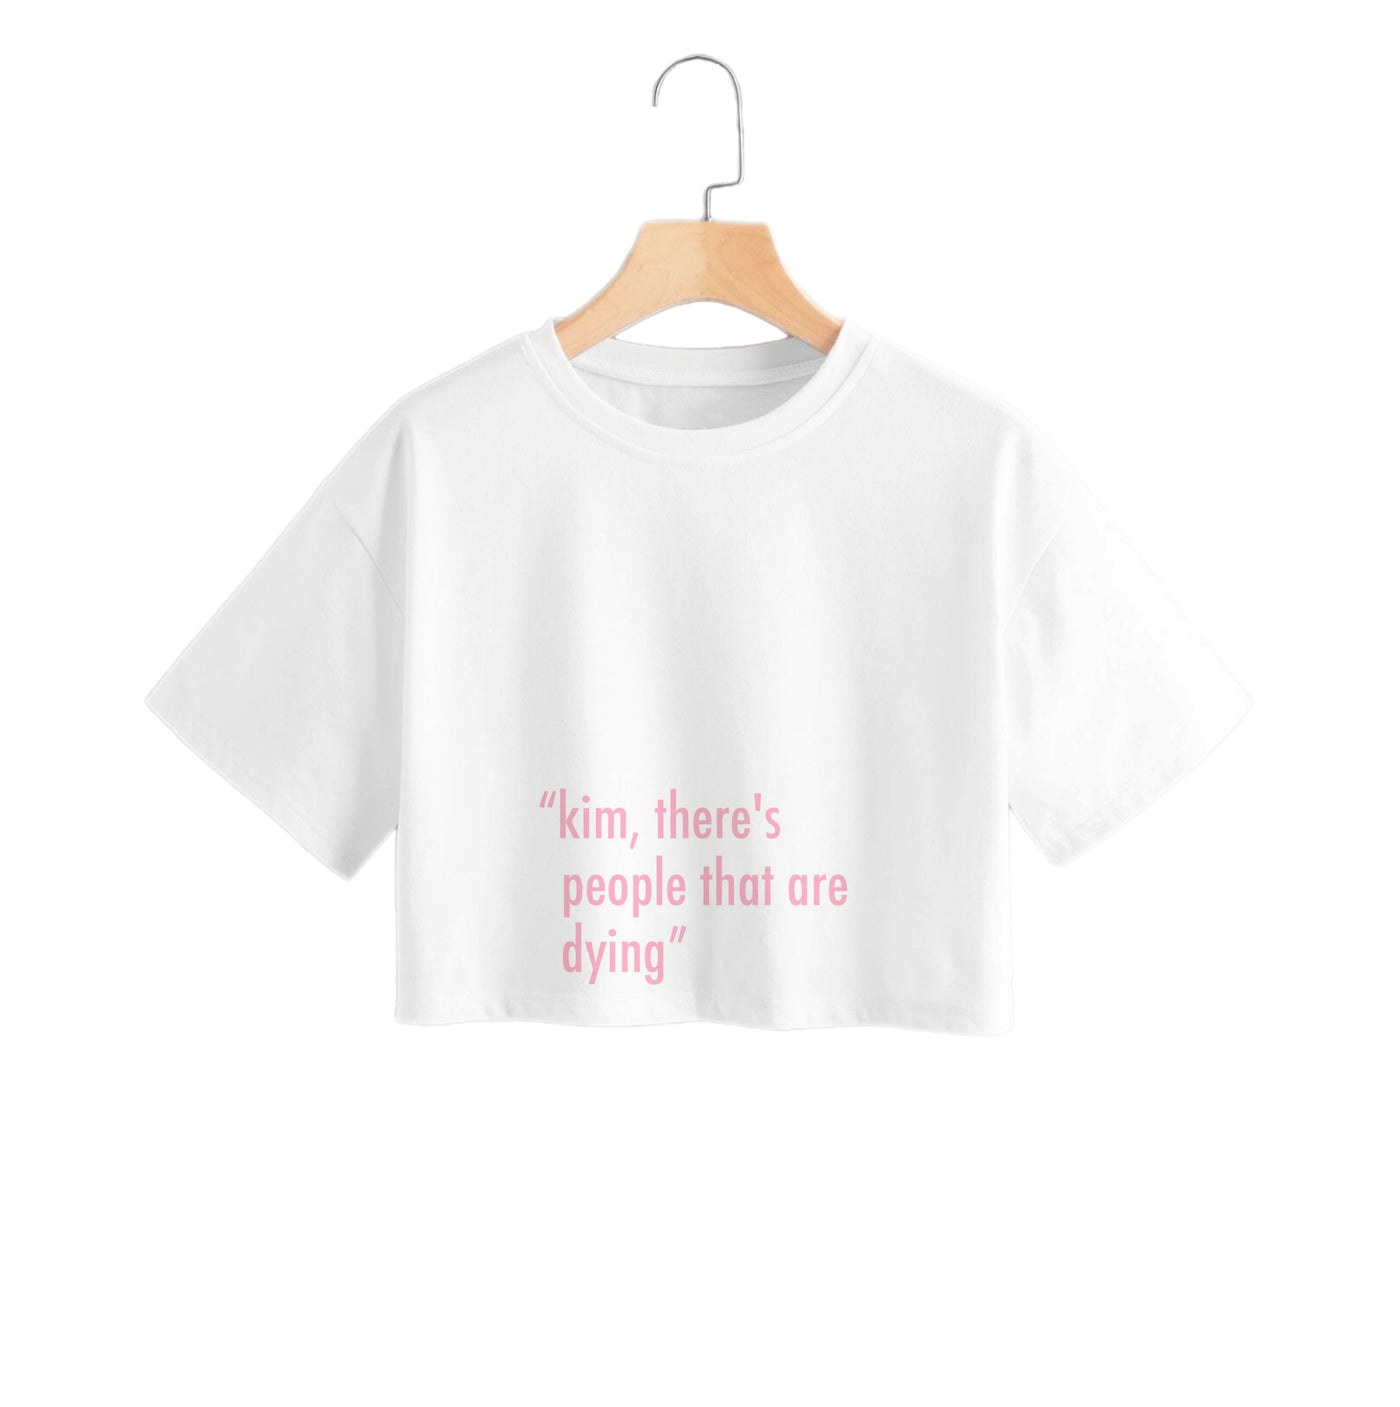 Kim, There's People That Are Dying - Kardashian Crop Top